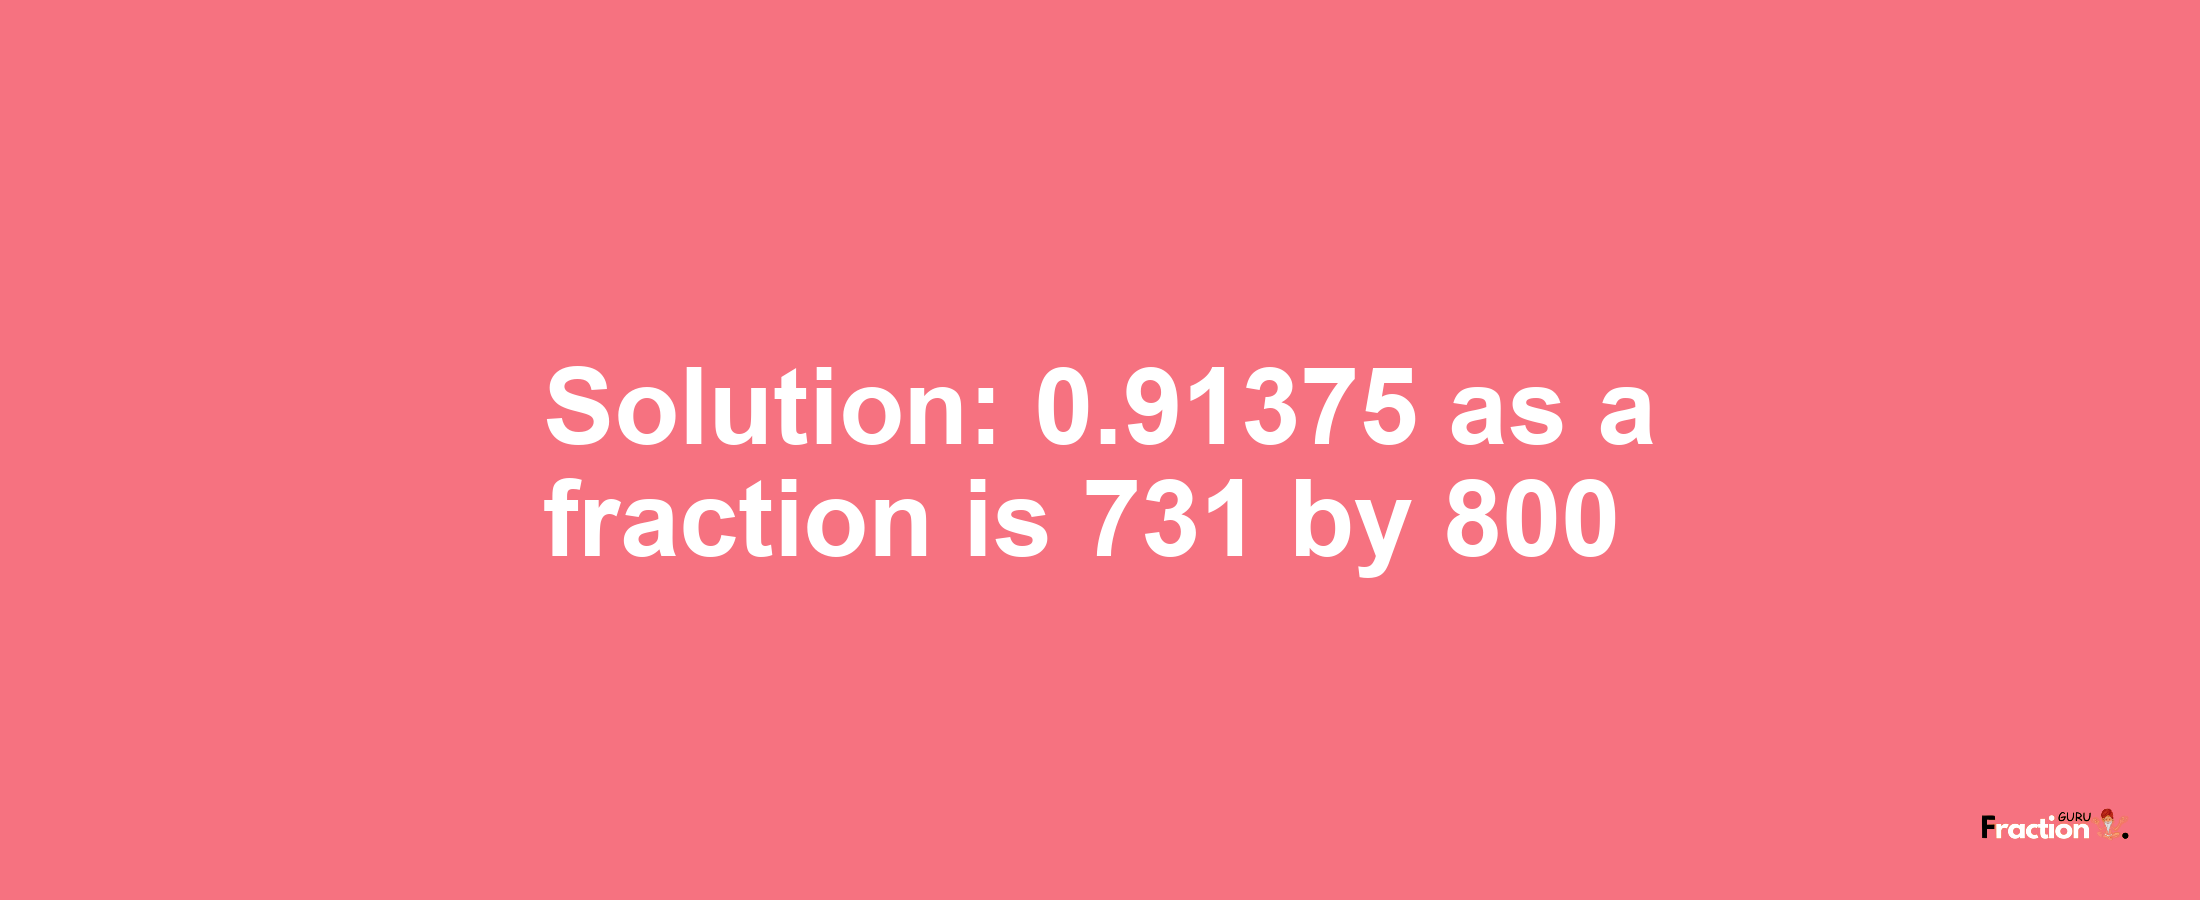 Solution:0.91375 as a fraction is 731/800